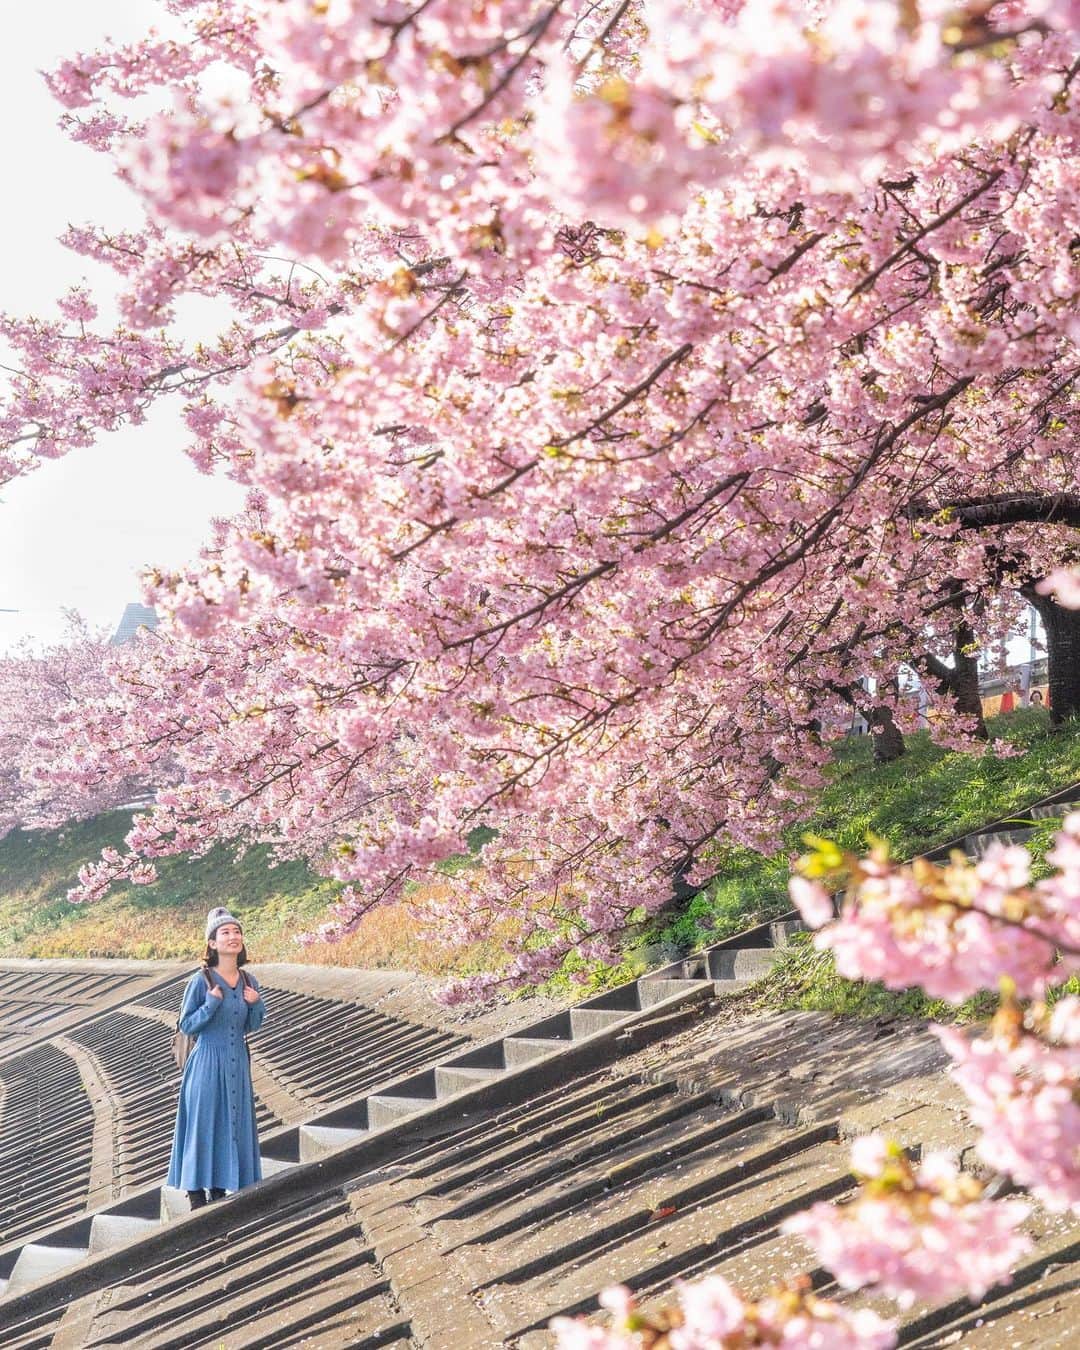 詩歩さんのインスタグラム写真 - (詩歩Instagram)「🌸﻿ ﻿ The cherry blossoms has started blooming in Tokyo! It's a little further ahead until we can see all flowers blooming, but we can't wait for spring!﻿ ﻿ This photo is "Kawazu Sakura", a synonym for the early blooming cherry. Kawazu cherry trees are planted along Oto River in Okazaki City, Aichi Prefecture, for about 600m. Kawazu Sakura originated in Shizuoka / Izu, so there are many Kawazu Sakura attractions in the Tokai area!  This photo is on March 1 and it's over here this year, but the row of cherry blossom trees was really beautiful. ﻿ ﻿ ﻿ 東京が早くも桜の開花宣言！﻿ ﻿ お花見ができるまではもう少し先だけど、春の訪れが待ち遠しい今日この頃。﻿ ﻿ この写真は、早咲きの桜の代名詞である「河津桜」。﻿ ﻿ 愛知県岡崎市の乙川沿いに、約600mに渡って河津桜が植えられています。﻿ （葵桜と呼ばれているらしい）﻿ ﻿ 河津桜は静岡・伊豆が発祥だから、東海エリアは河津桜の名所が多いんだな〜！﻿ ずっと浜松に住んでたのに、全然知らなかった。。﻿ ﻿ この写真は3月1日なので今年の見頃は終わってるけれど、ソメイヨシノよりも濃いピンク色の桜並木が本当にキレイだった〜🌸﻿ ﻿ 土手沿いに咲いてるから、土手を歩いて桜を同じ目線で見れるもよし、階段で下って川沿いから見上げるもよし！﻿ ﻿ お散歩が楽しくなる川沿いでした。﻿ ﻿ ﻿ ﻿ ﻿ 📷1st Mar 2020 shot by @erika520anko ﻿ 📍乙川沿いの葵桜／愛知県　岡崎市﻿ 📍Aoi sakura along Oto-river／Aichi Japan﻿ ﻿ ﻿ ©︎Shiho/詩歩﻿」3月16日 16時59分 - shiho_zekkei